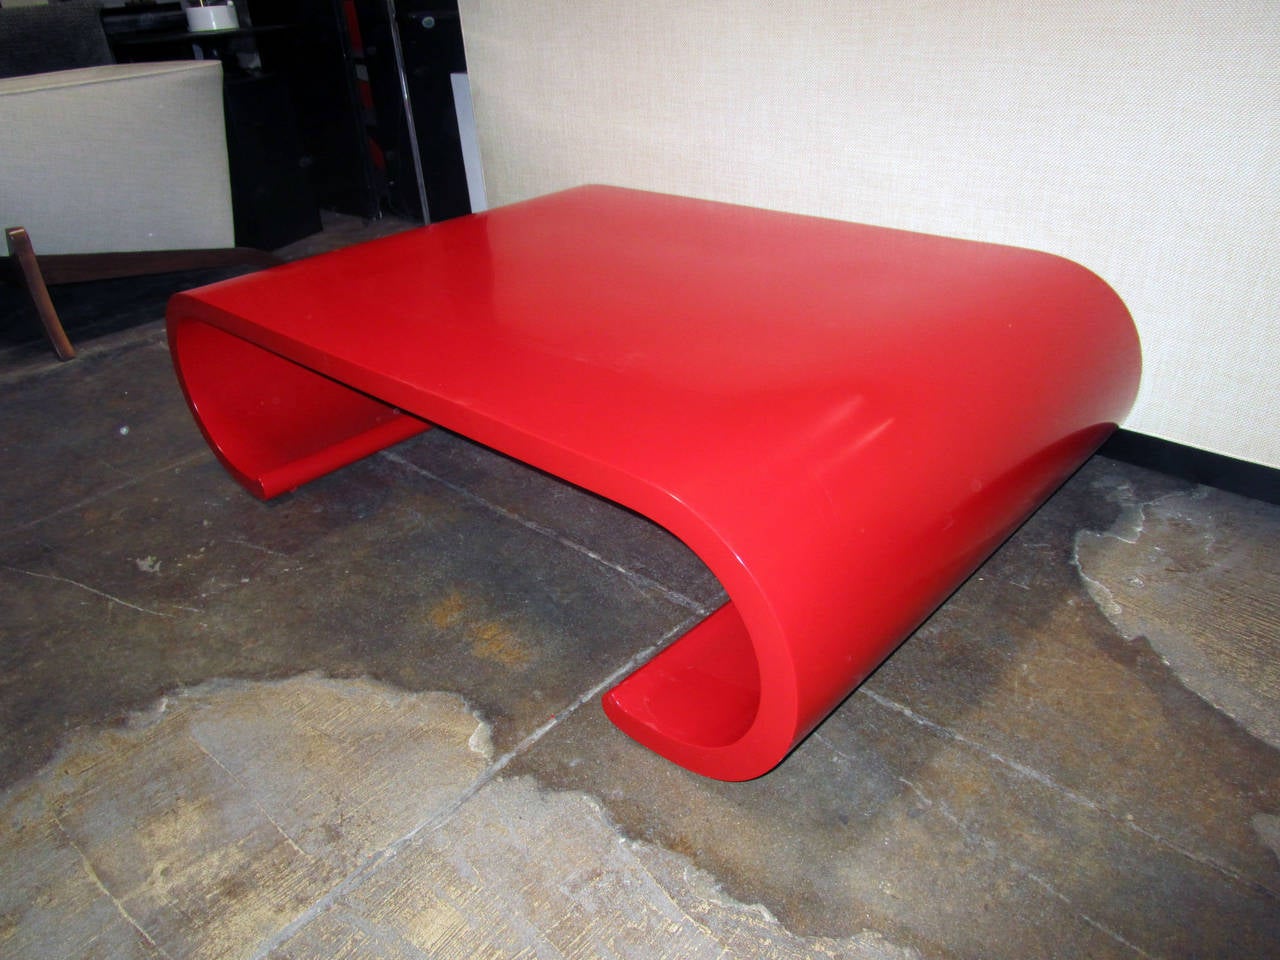 This Asian inspired, scroll cocktail table attributed to Karl Springer features a glossy, red lacquer finish. This modern coffee table would add a distinctive pop of color to your living or office space.